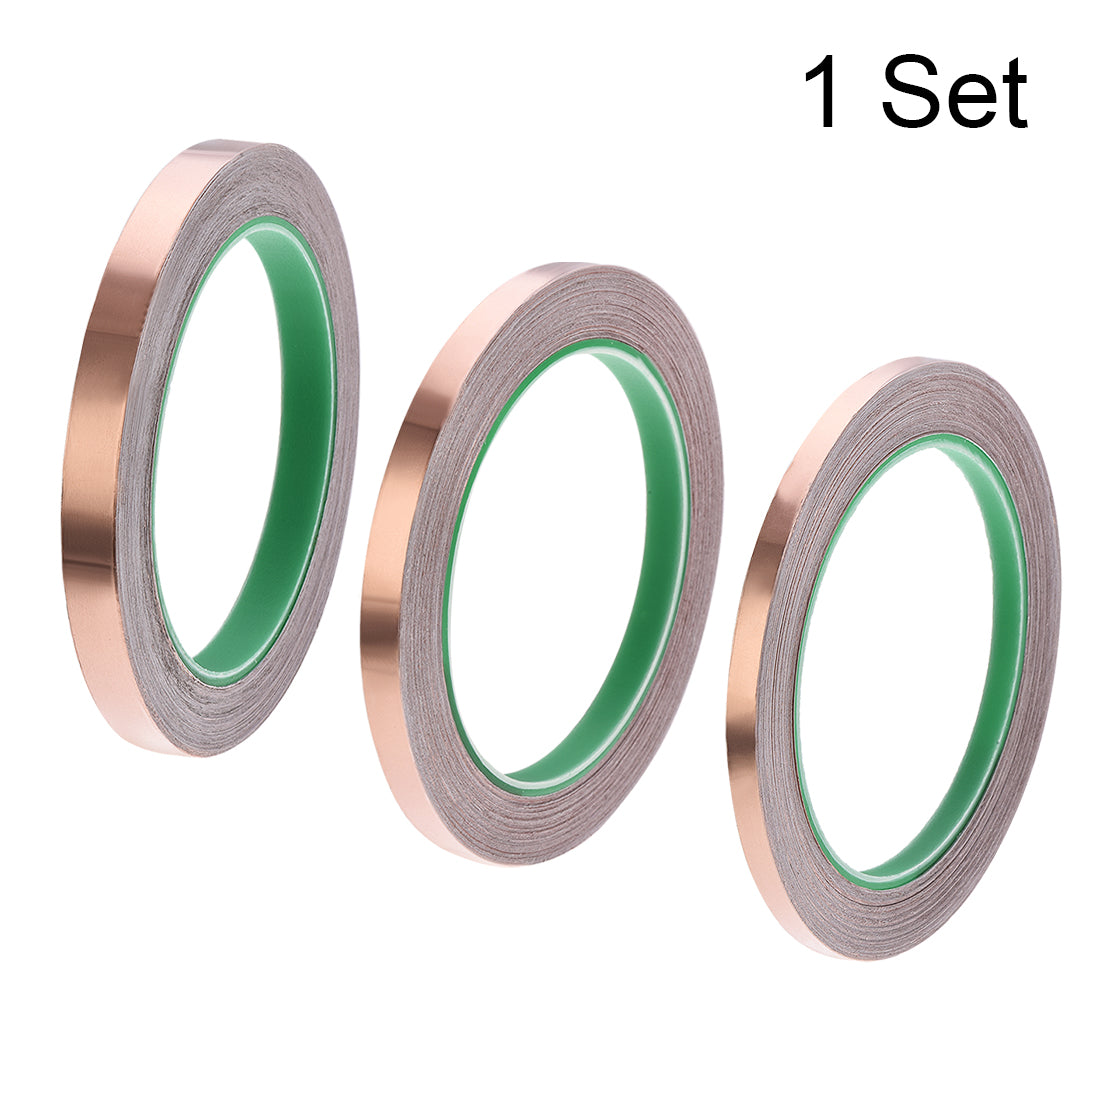 uxcell Uxcell 6mm,8mm,10mm Copper Foil Tape for EMI EMF and RFI Shielding 20m/65.6ft 1 Set